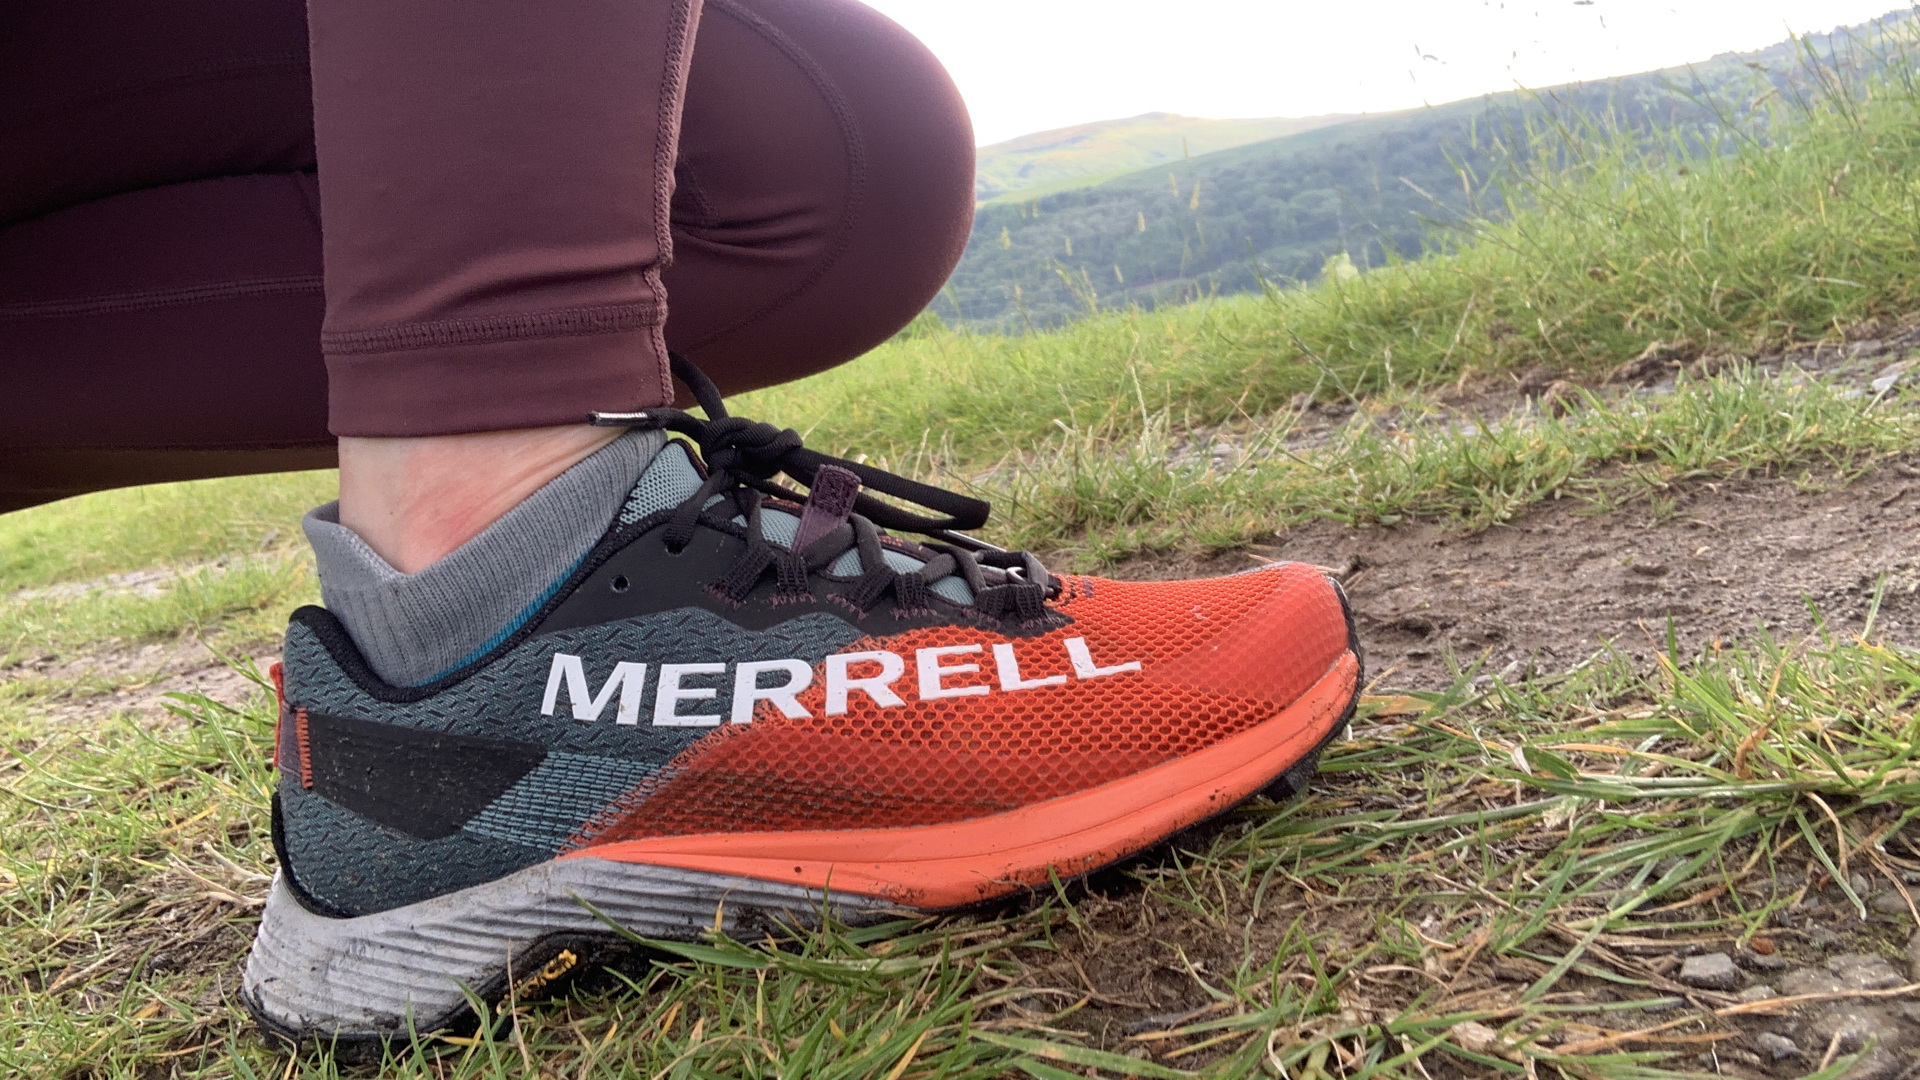 Merrell MTL Long Sky 2 trail running shoes review: lock in for